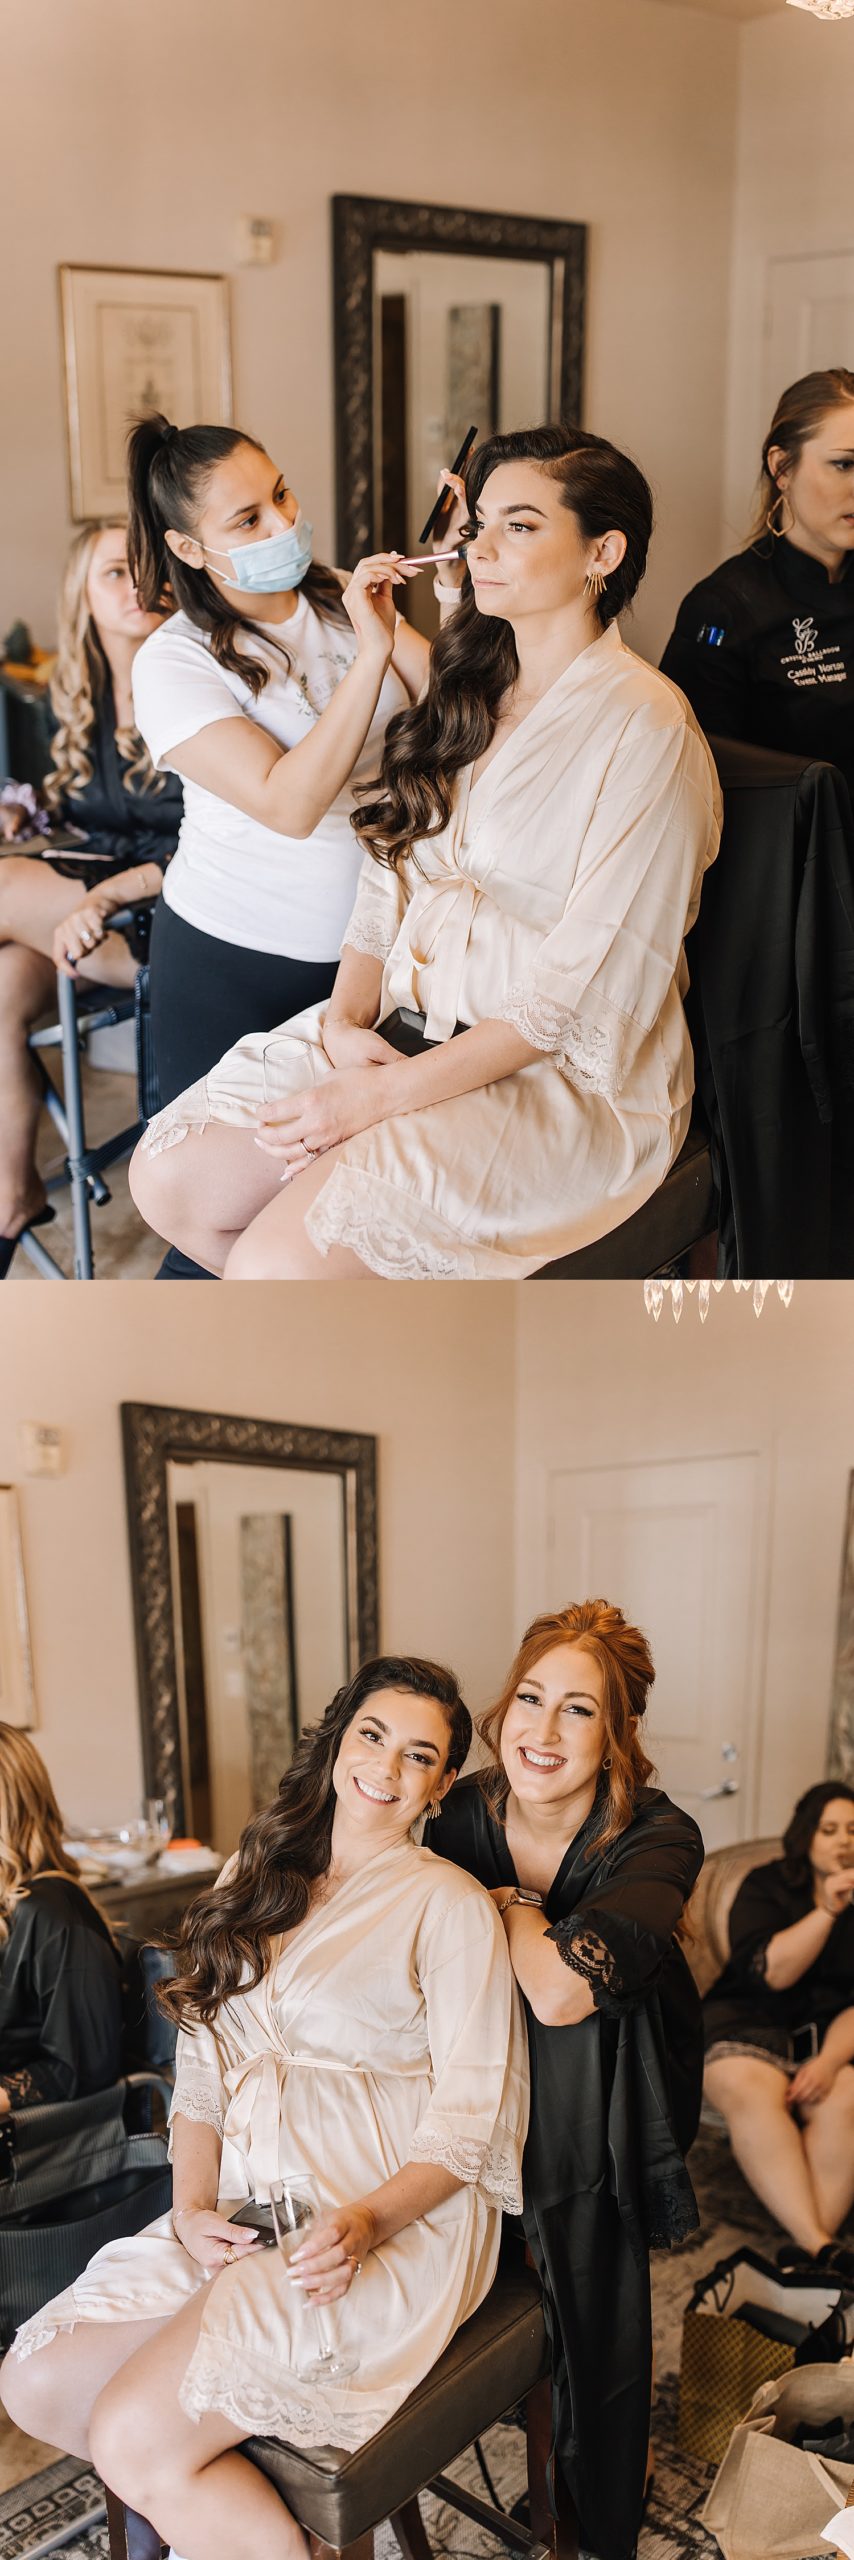 Bride getting ready with make up artists and bridesmaids